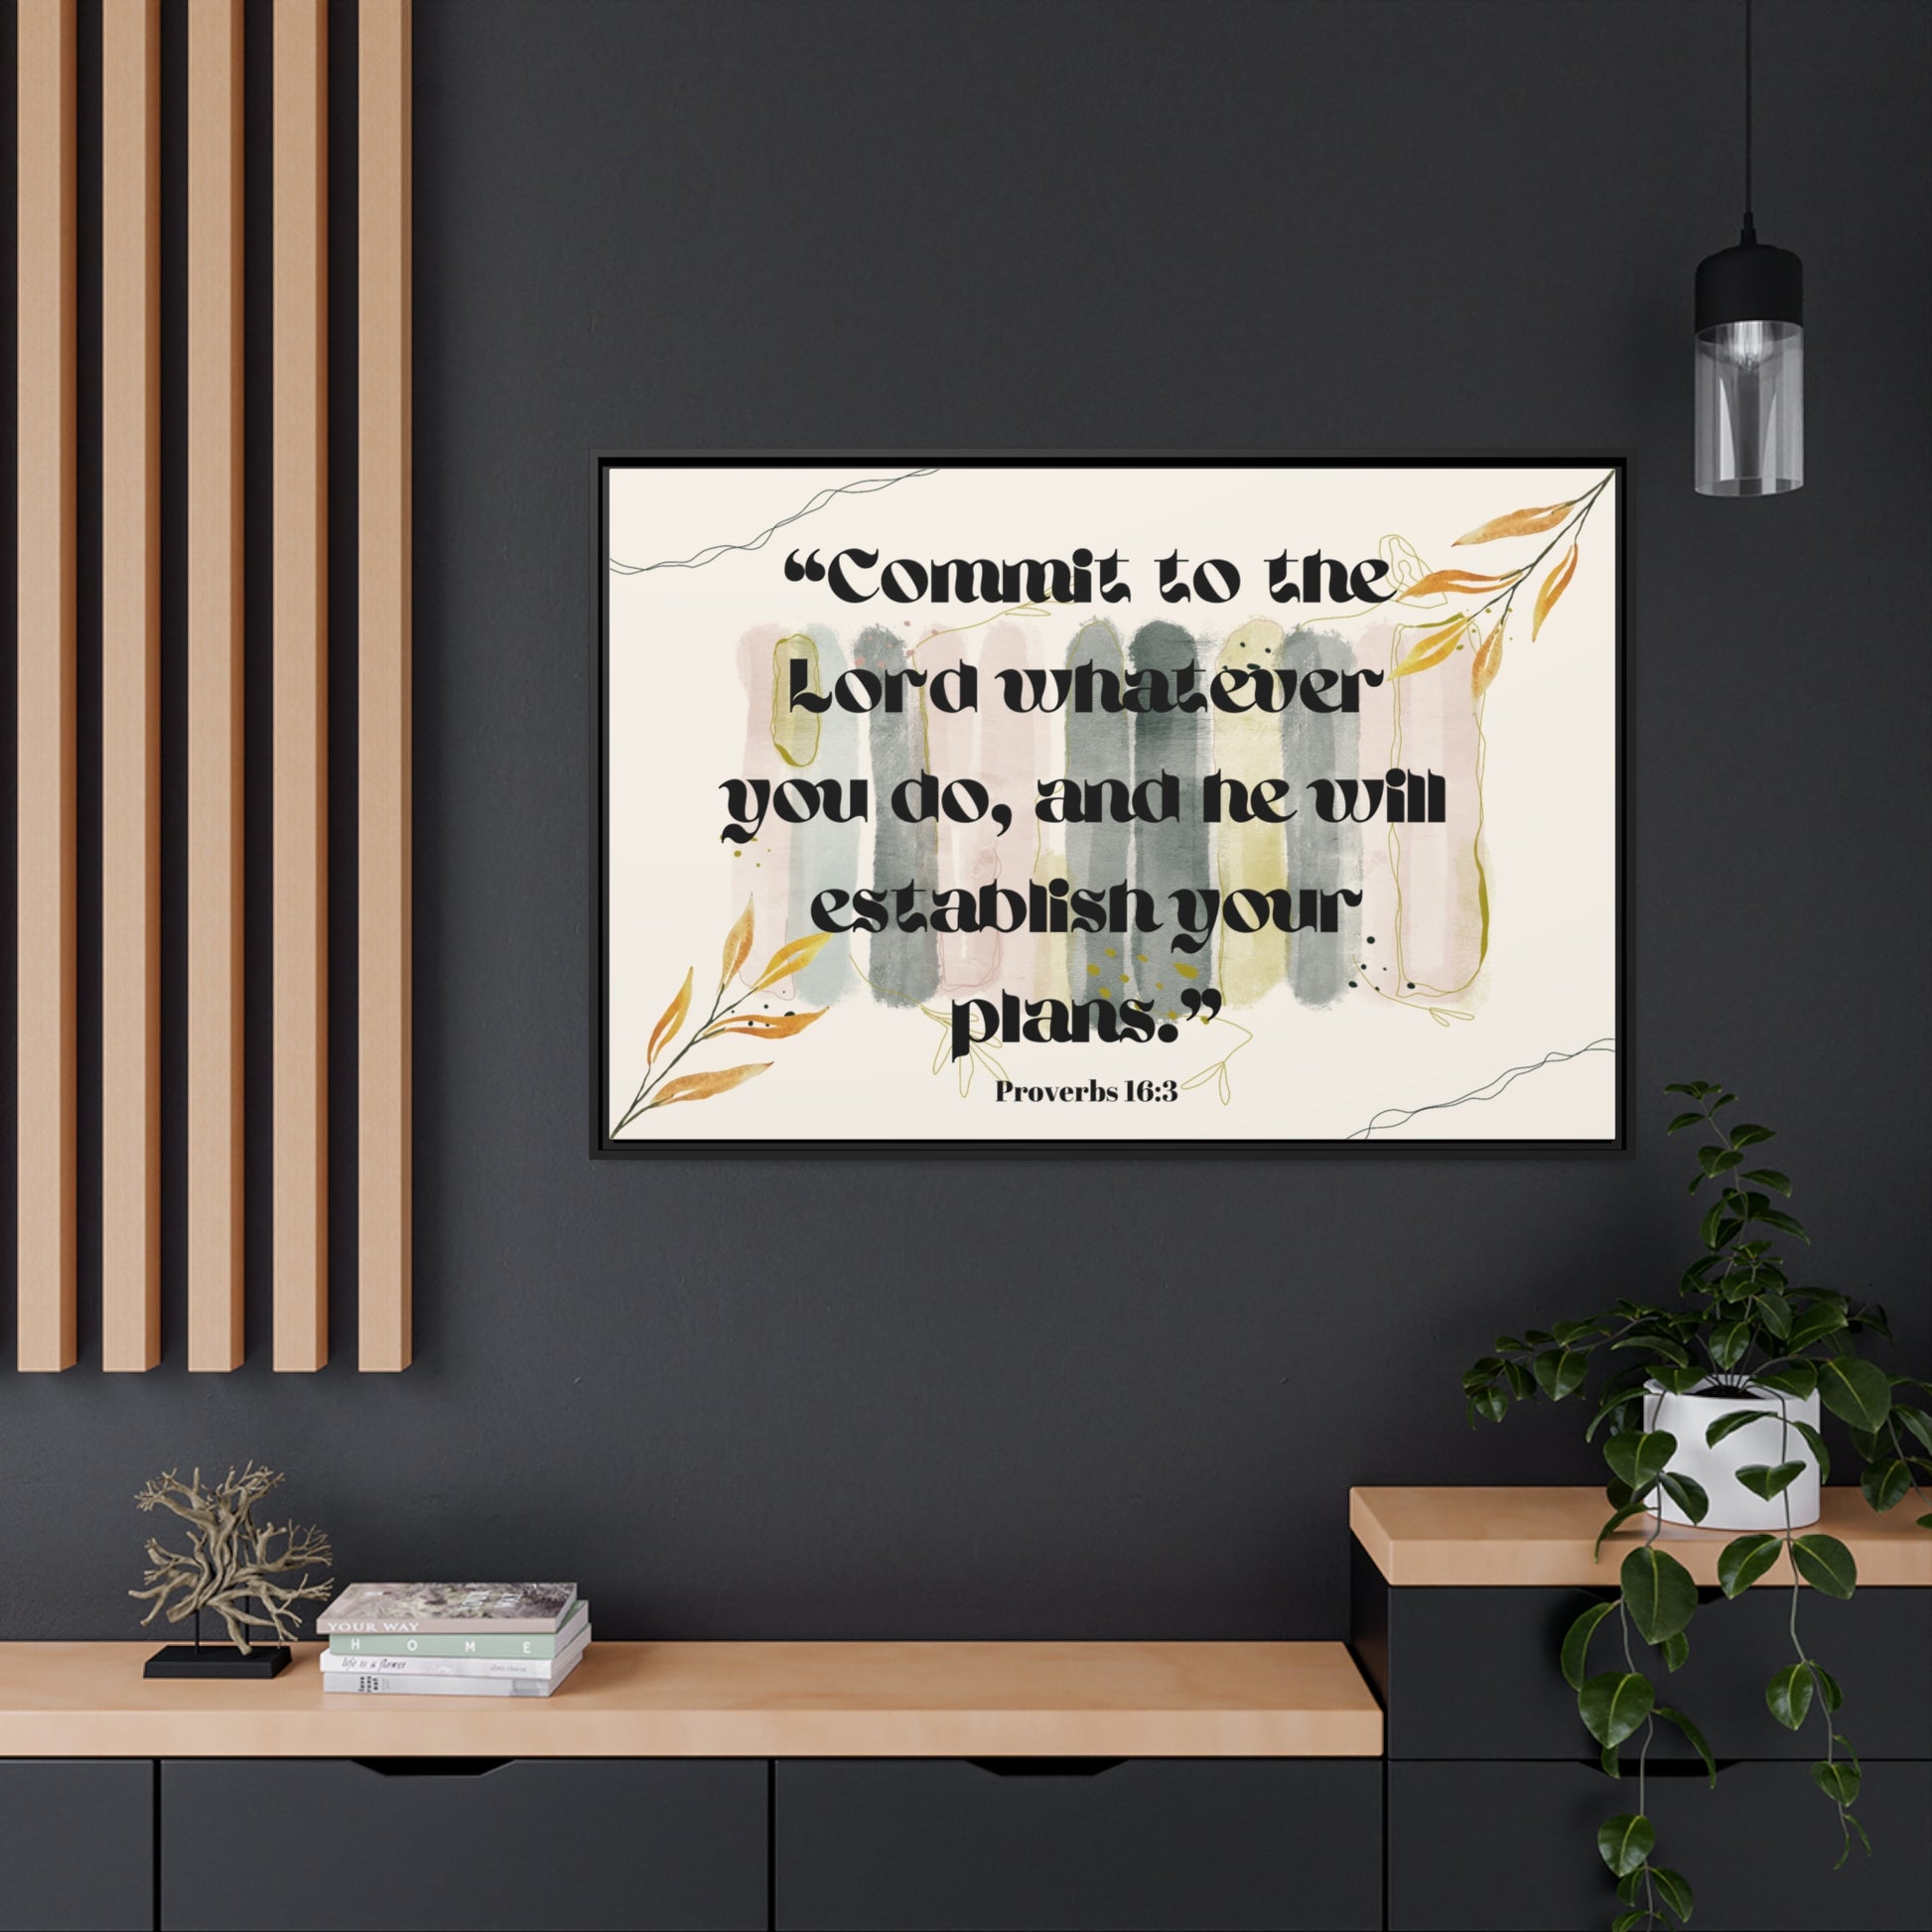 Framed Canvas Wall Art: Eco-Friendly, Vibrant Prints with Scriptural Verse | Art & Wall Decor,Canvas,Decor,Eco-friendly,Framed,Hanging Hardware,Home & Living,Summer Picks,Sustainable